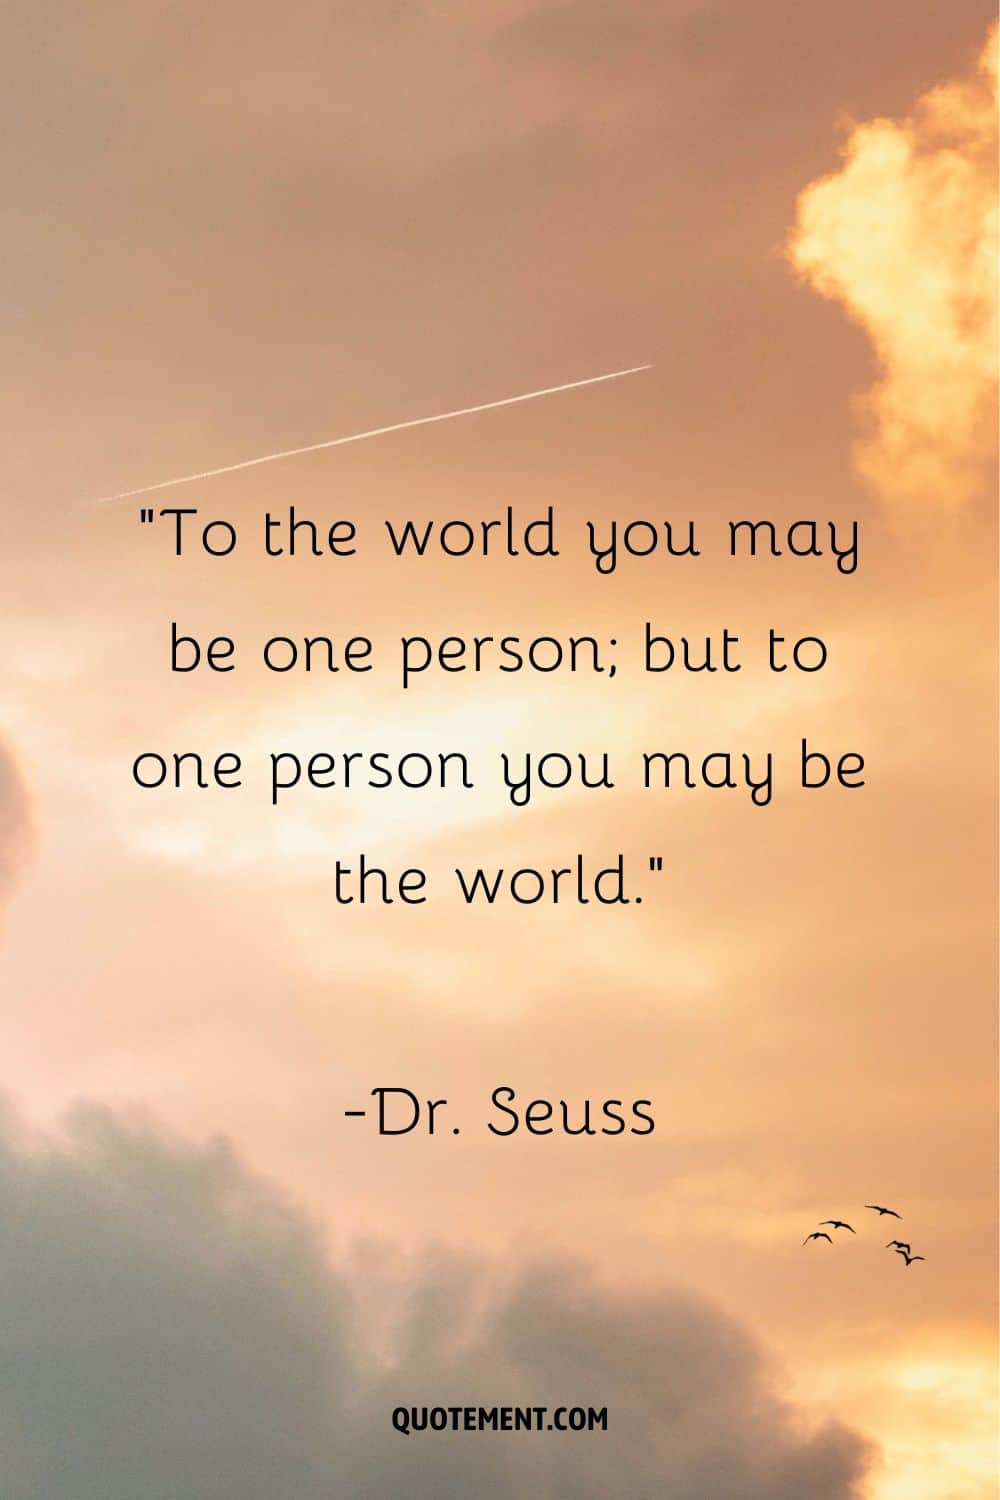 To the world you may be one person; but to one person you may be the world